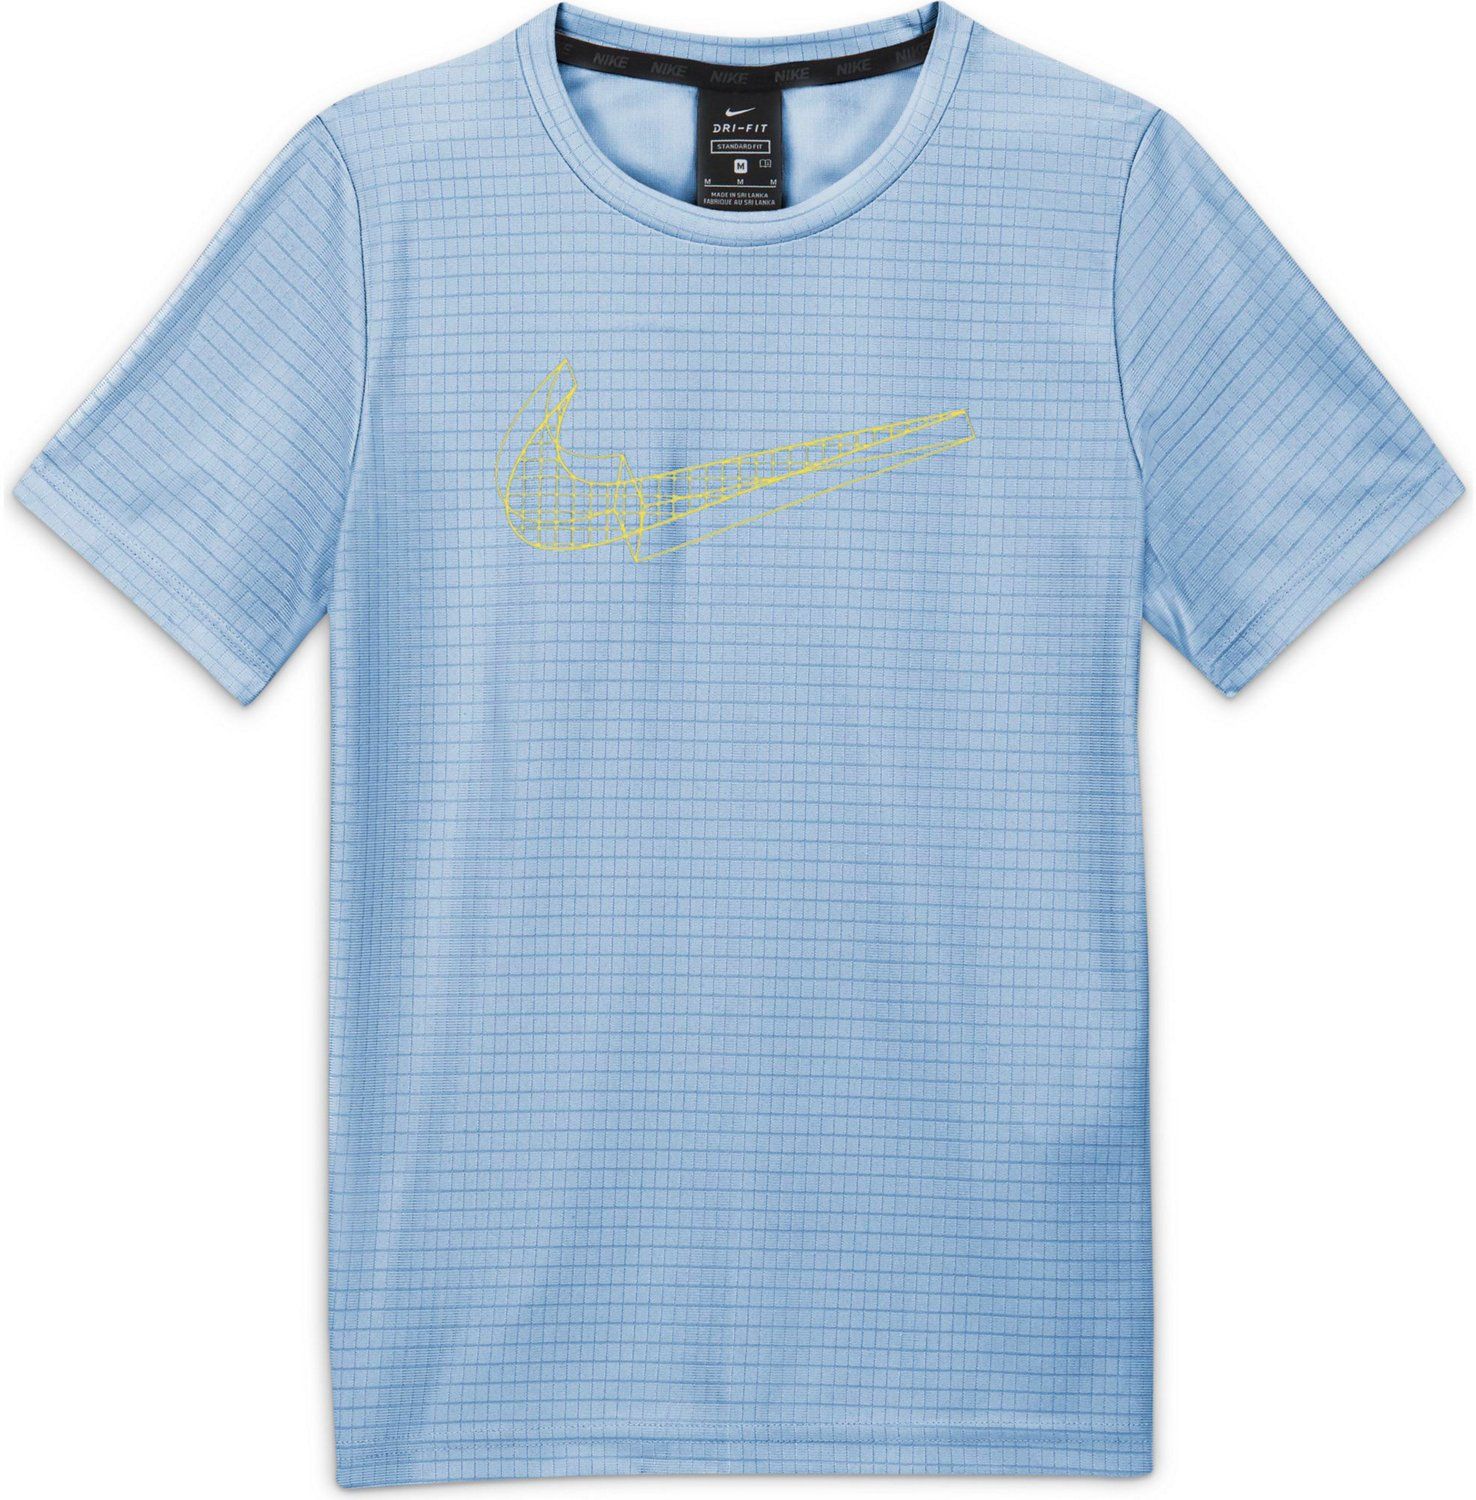 Nike Boys’ Breathe Graphic Training T-shirt | Academy Sports + Outdoor Affiliate